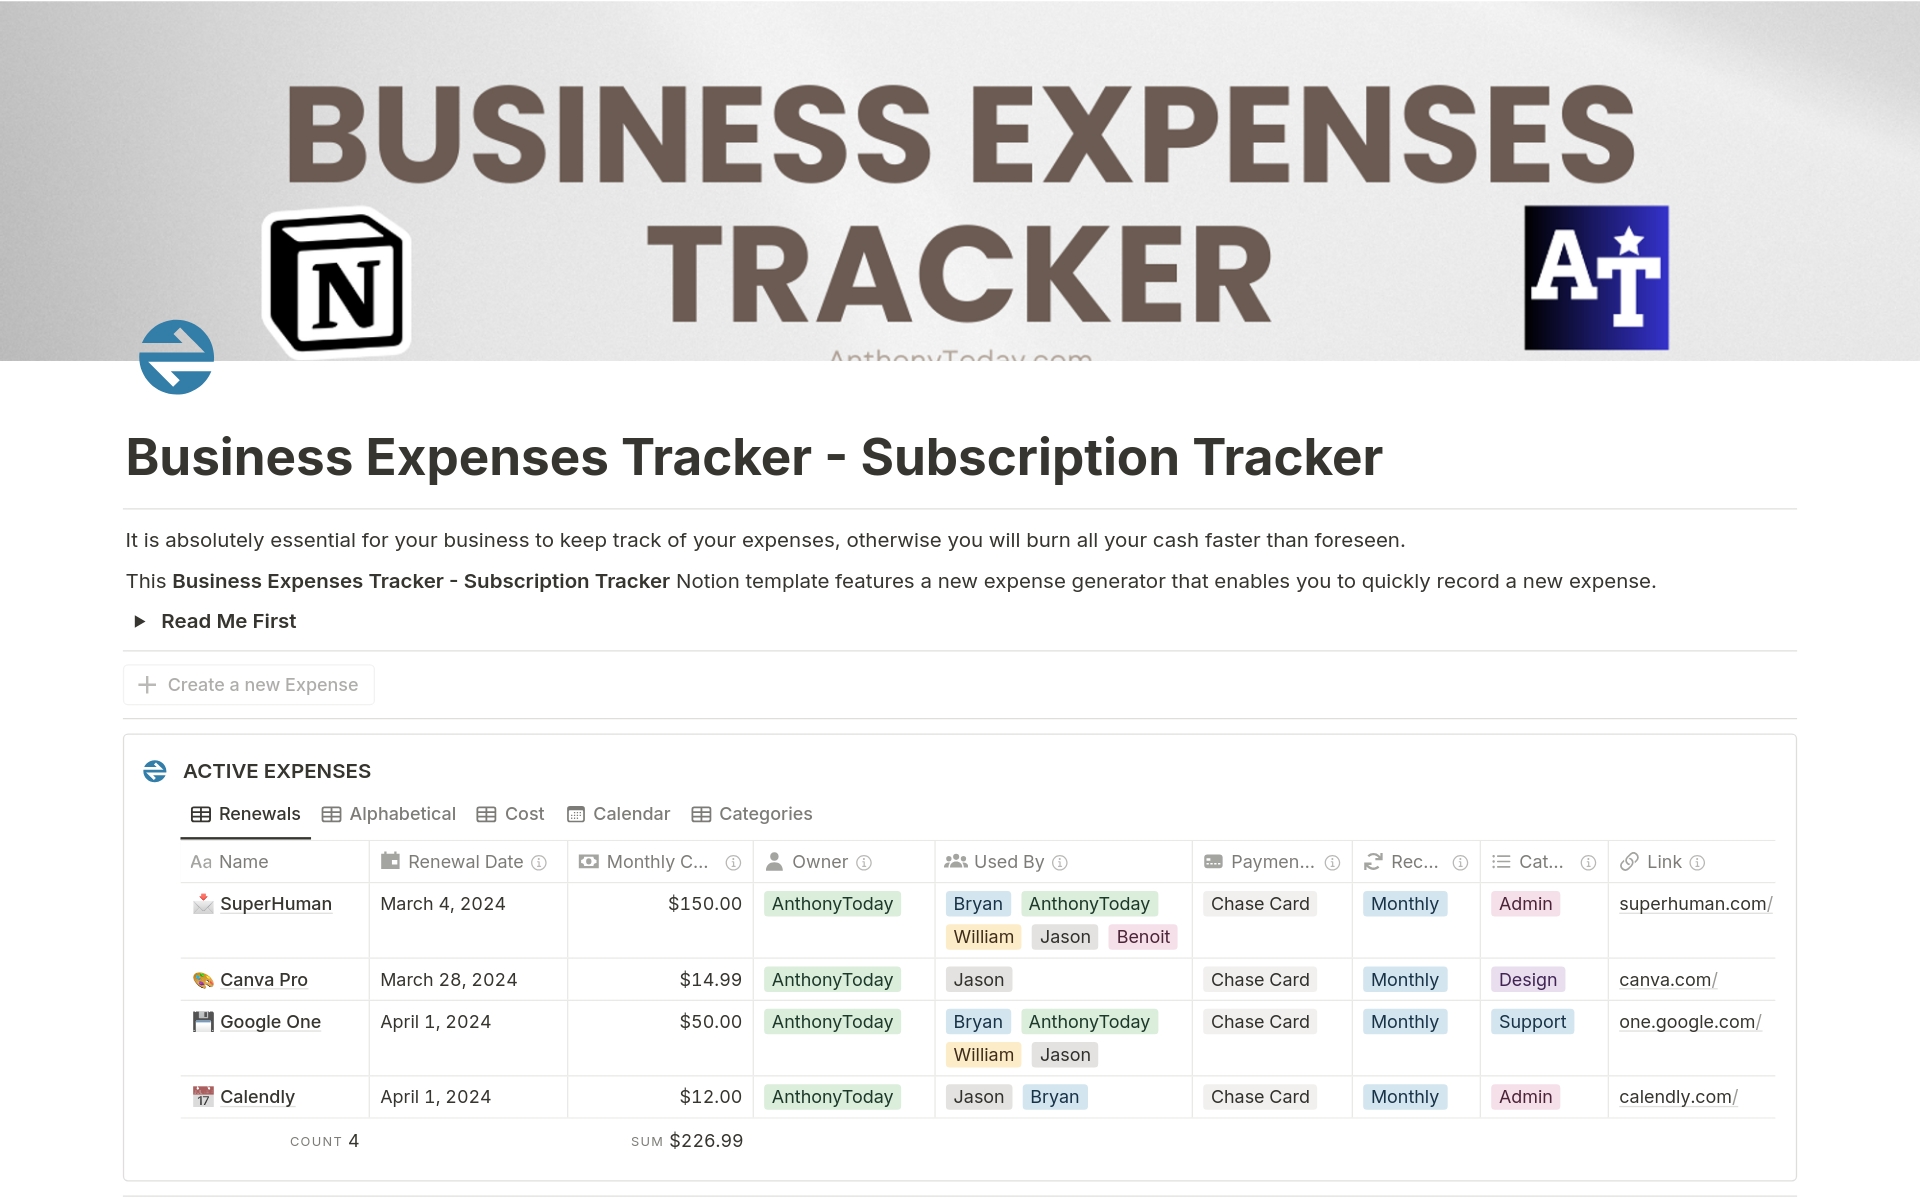 This simple Business Expenses Tracker - Subscription Tracker features a "one-click" function to record a new expense. You will manage all your expenses and keep the overview of all subscriptions, including their payment dates in a calendar view.